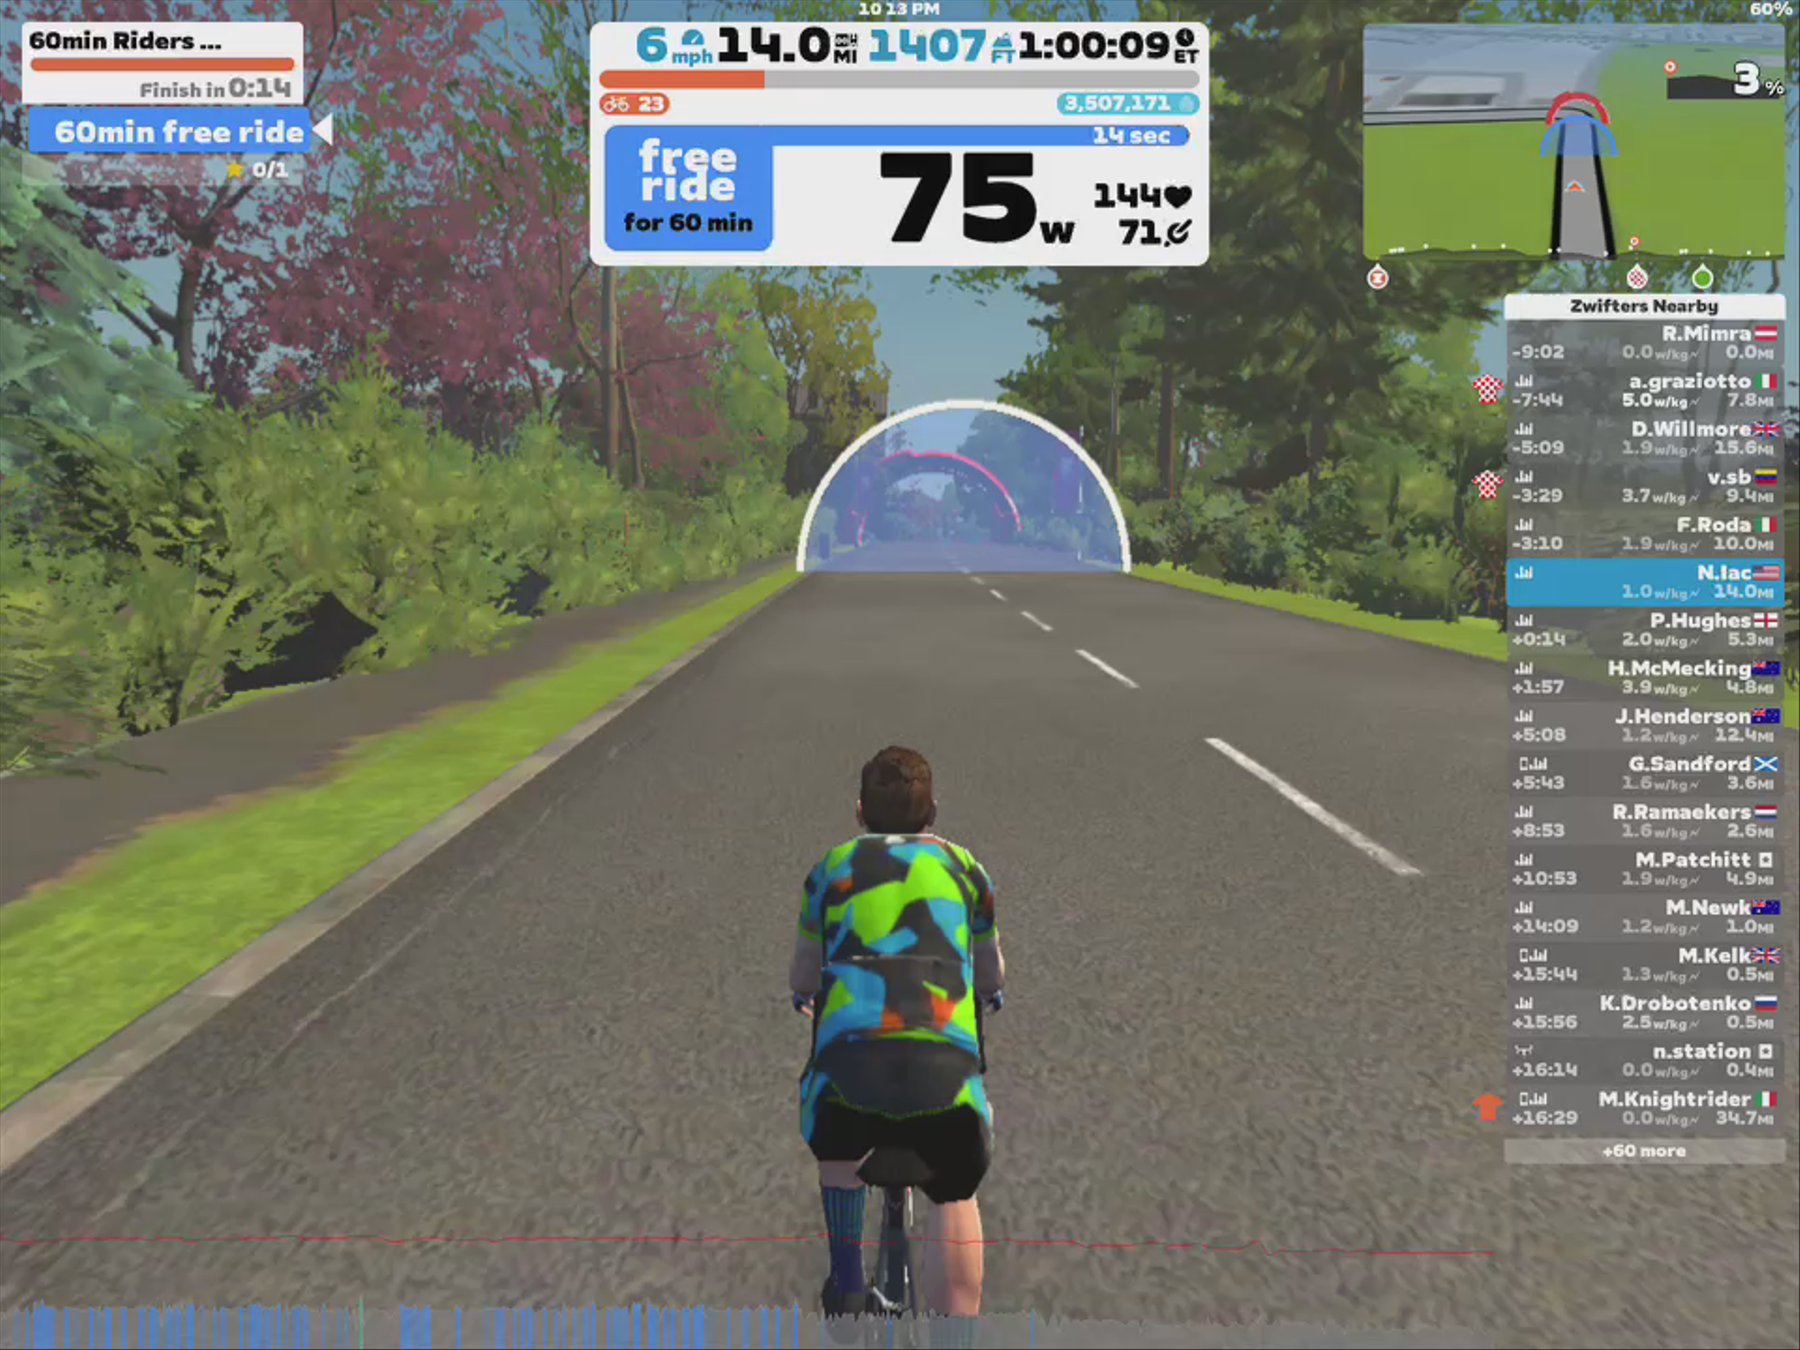 Zwift - 60min Riders Choice in Yorkshire